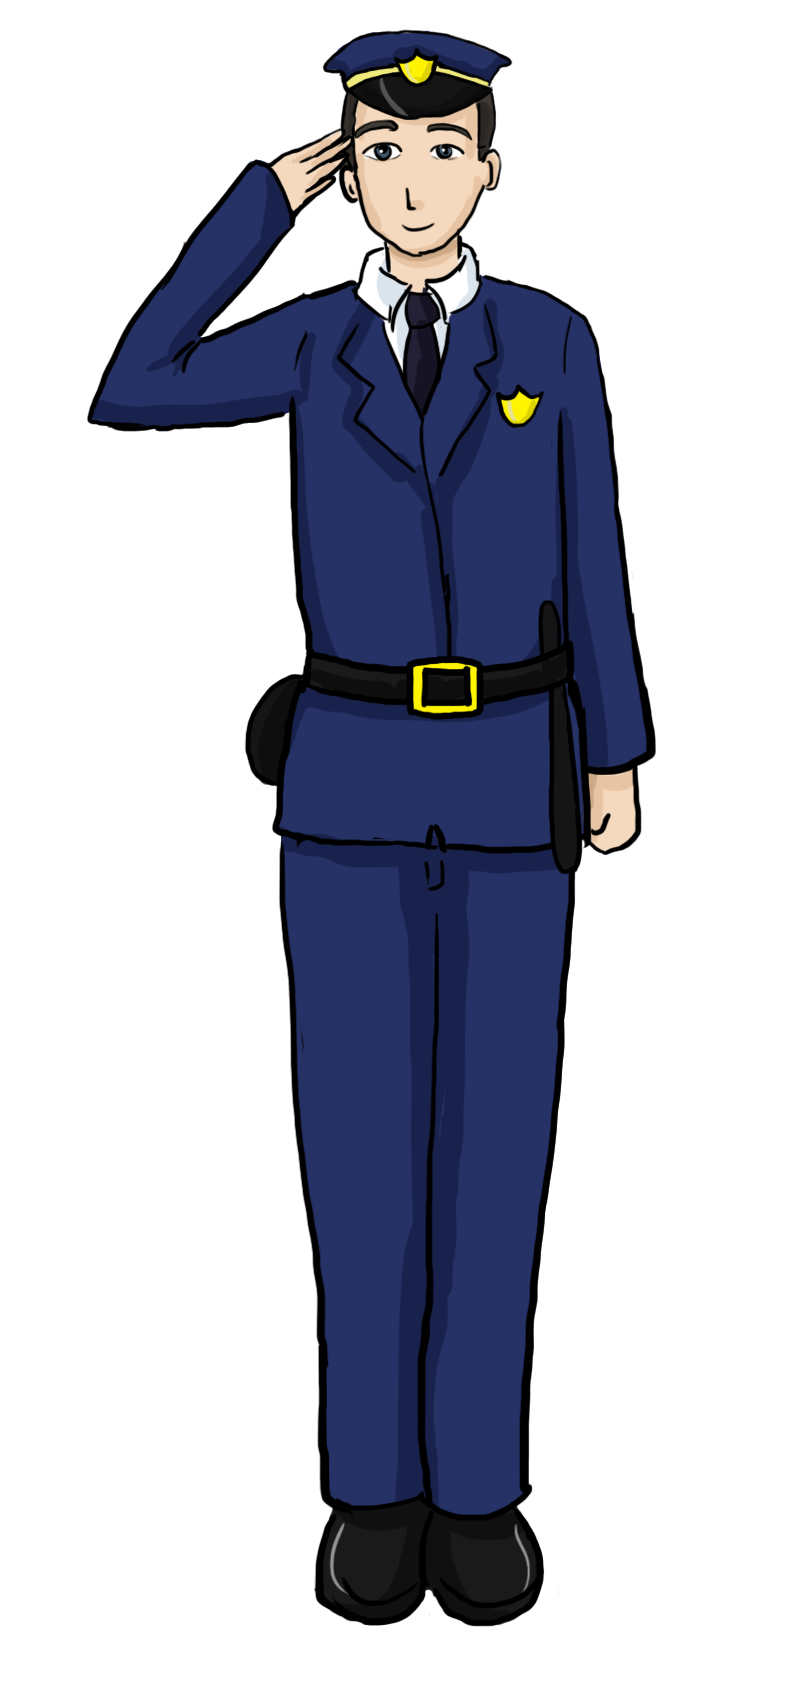 Police Png Image Clipart